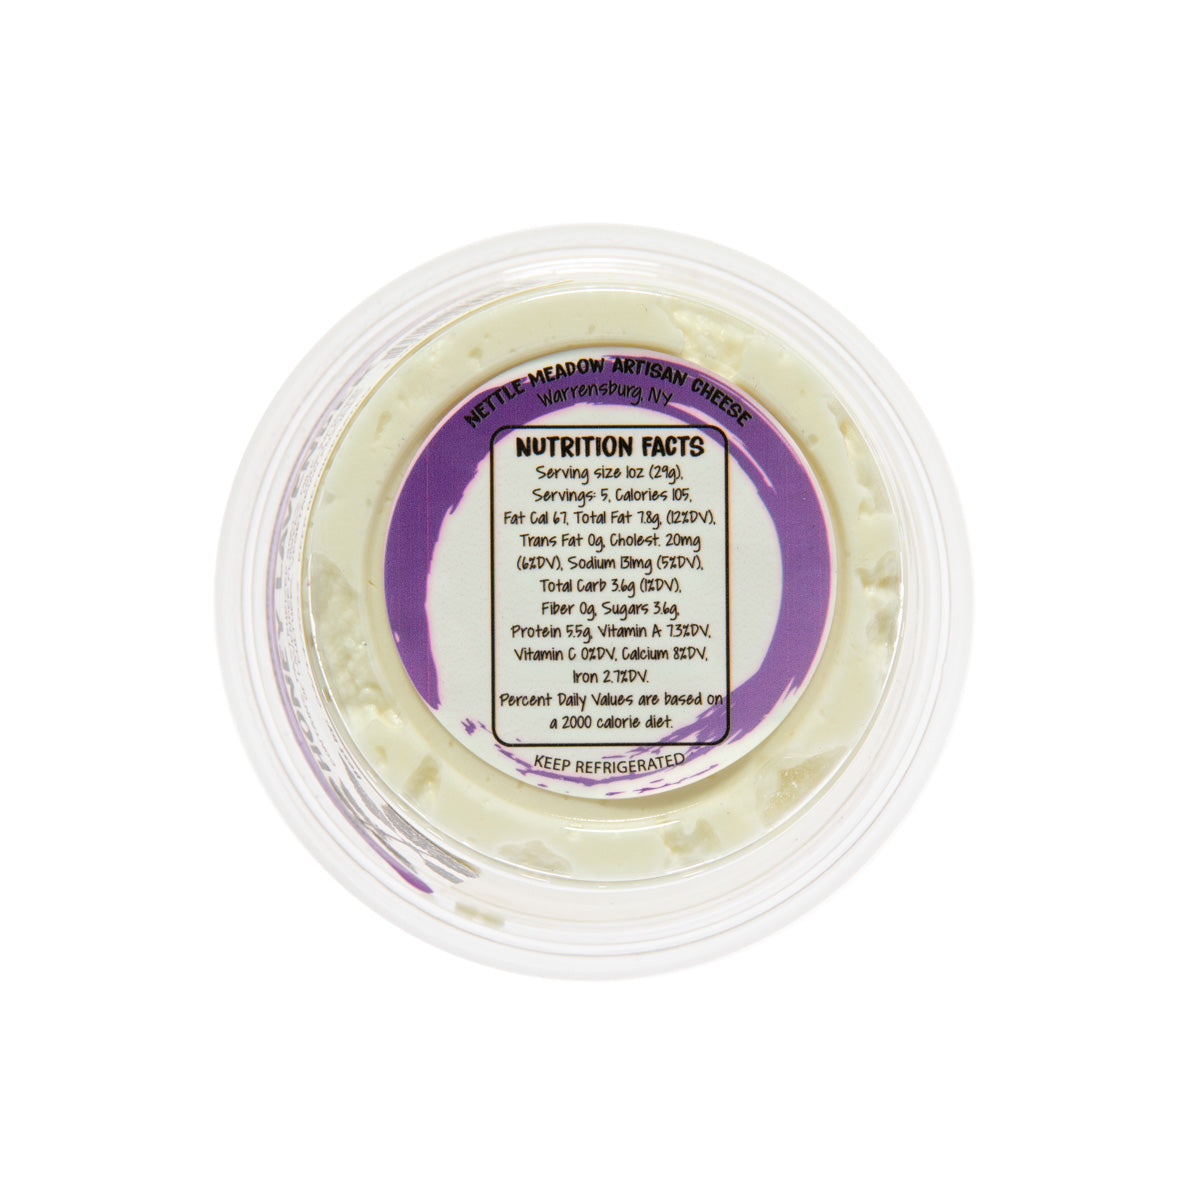 Nettle Meadow Farm Fromage Blanc Honey Lavender Cheese Cups 5 OZ